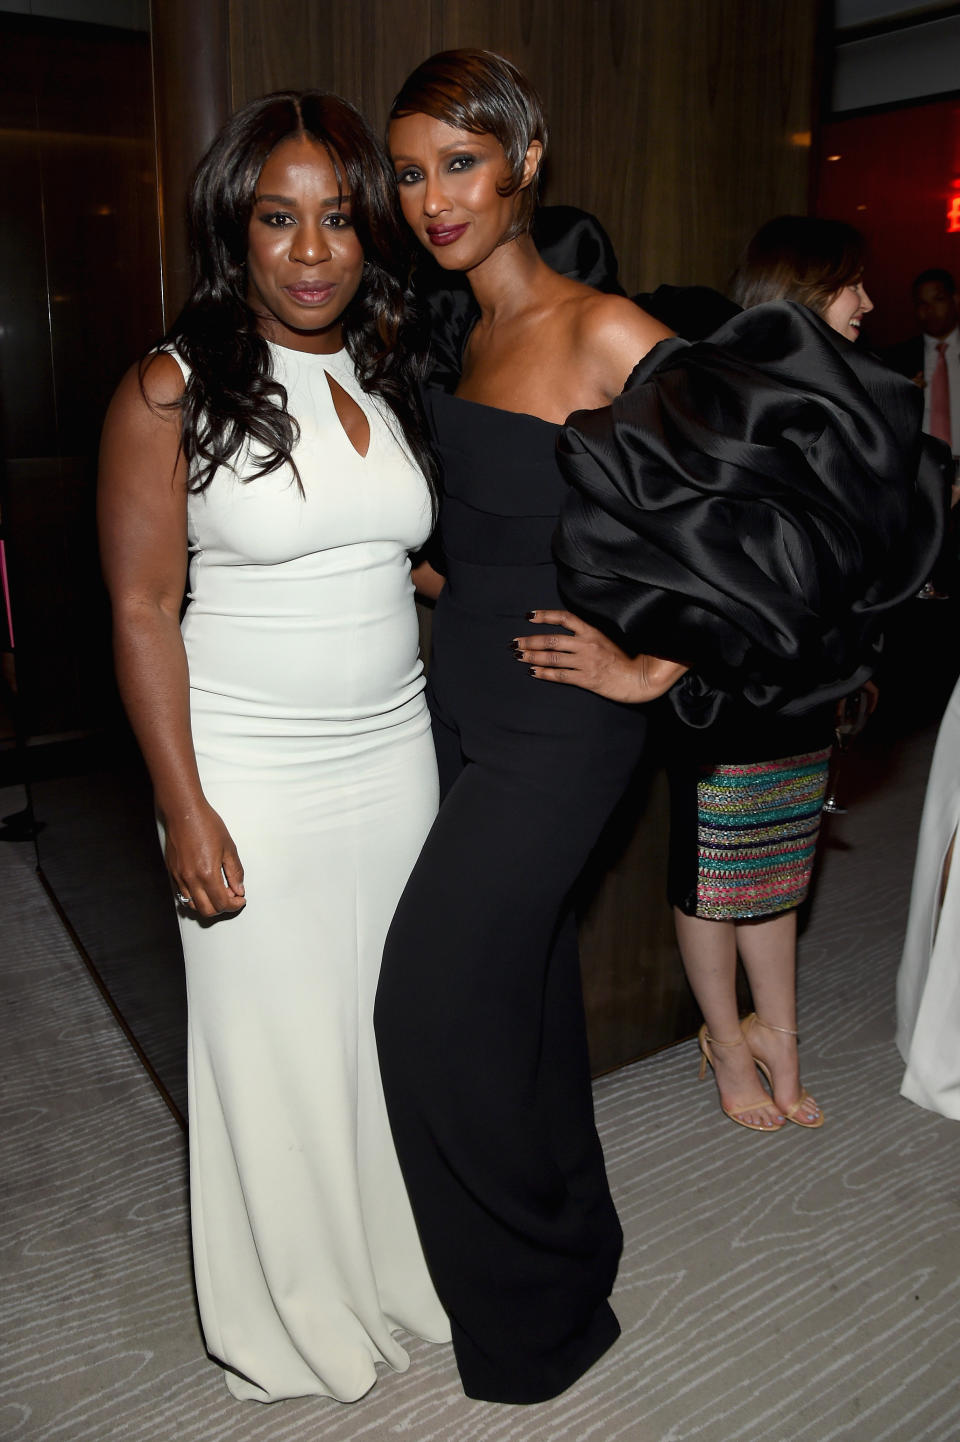 NEW YORK, NY - NOVEMBER 09:  Actress Uzo Aduba (L) and model Iman attend the 2015 Glamour Women of The Year Awards dinner hosted by Cindi Leive at The Rainbow Room on November 9, 2015 in New York City.  (Photo by Jamie McCarthy/Getty Images for Glamour)